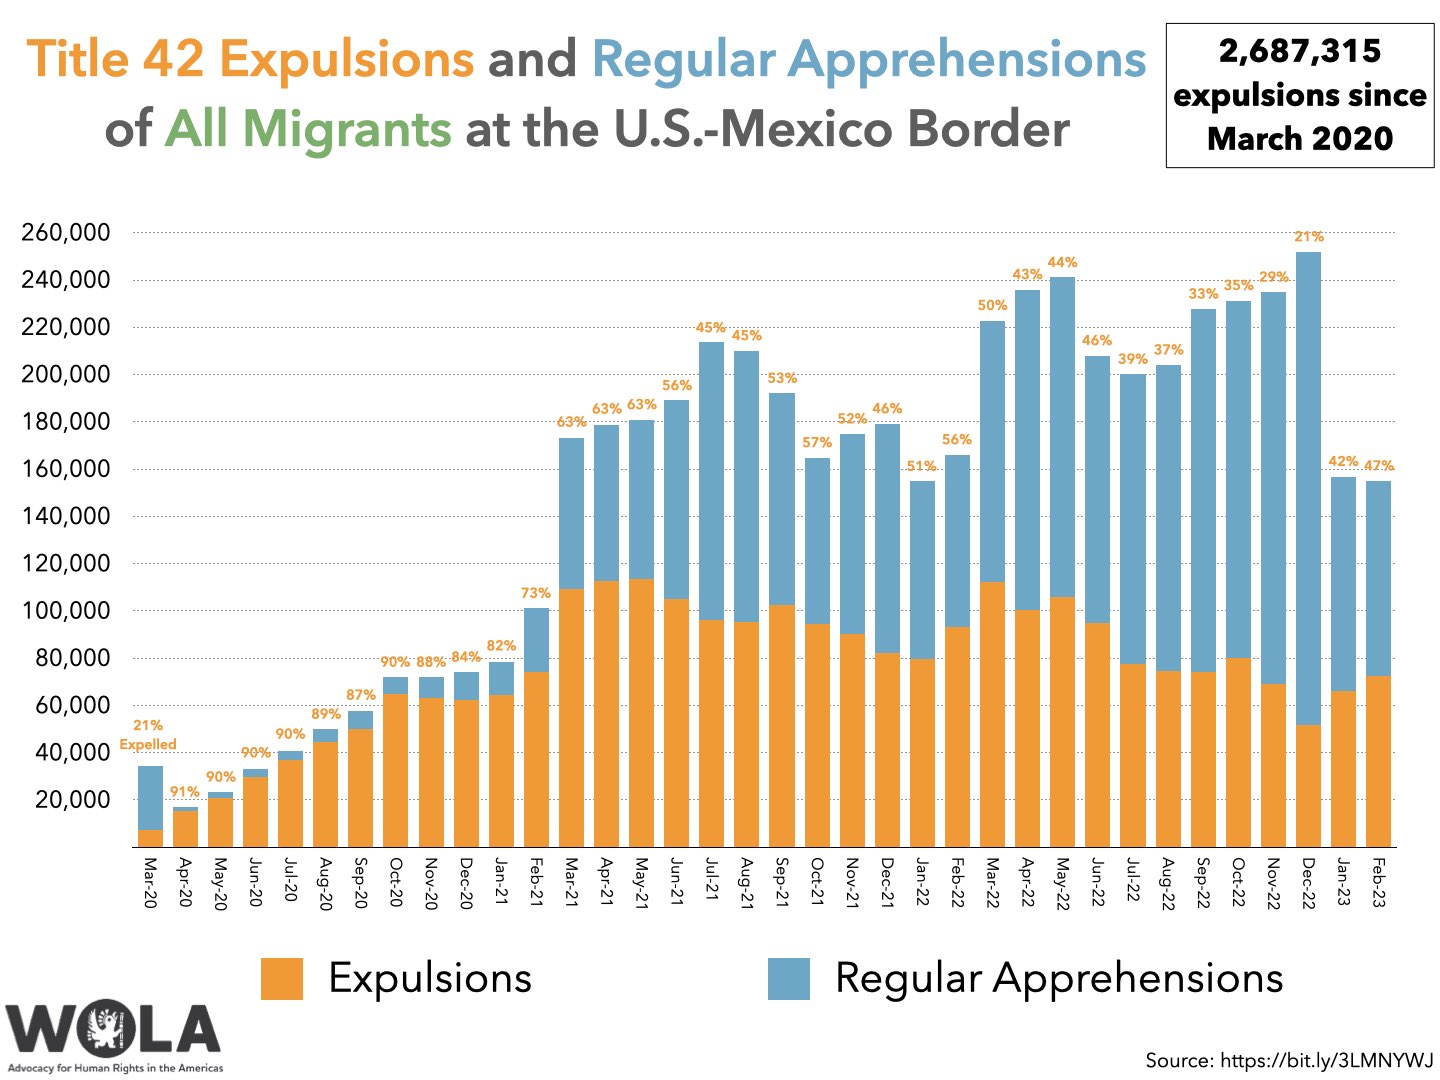 Title 42 Expulsions and Regular Apprehensions of All Migrants at the U